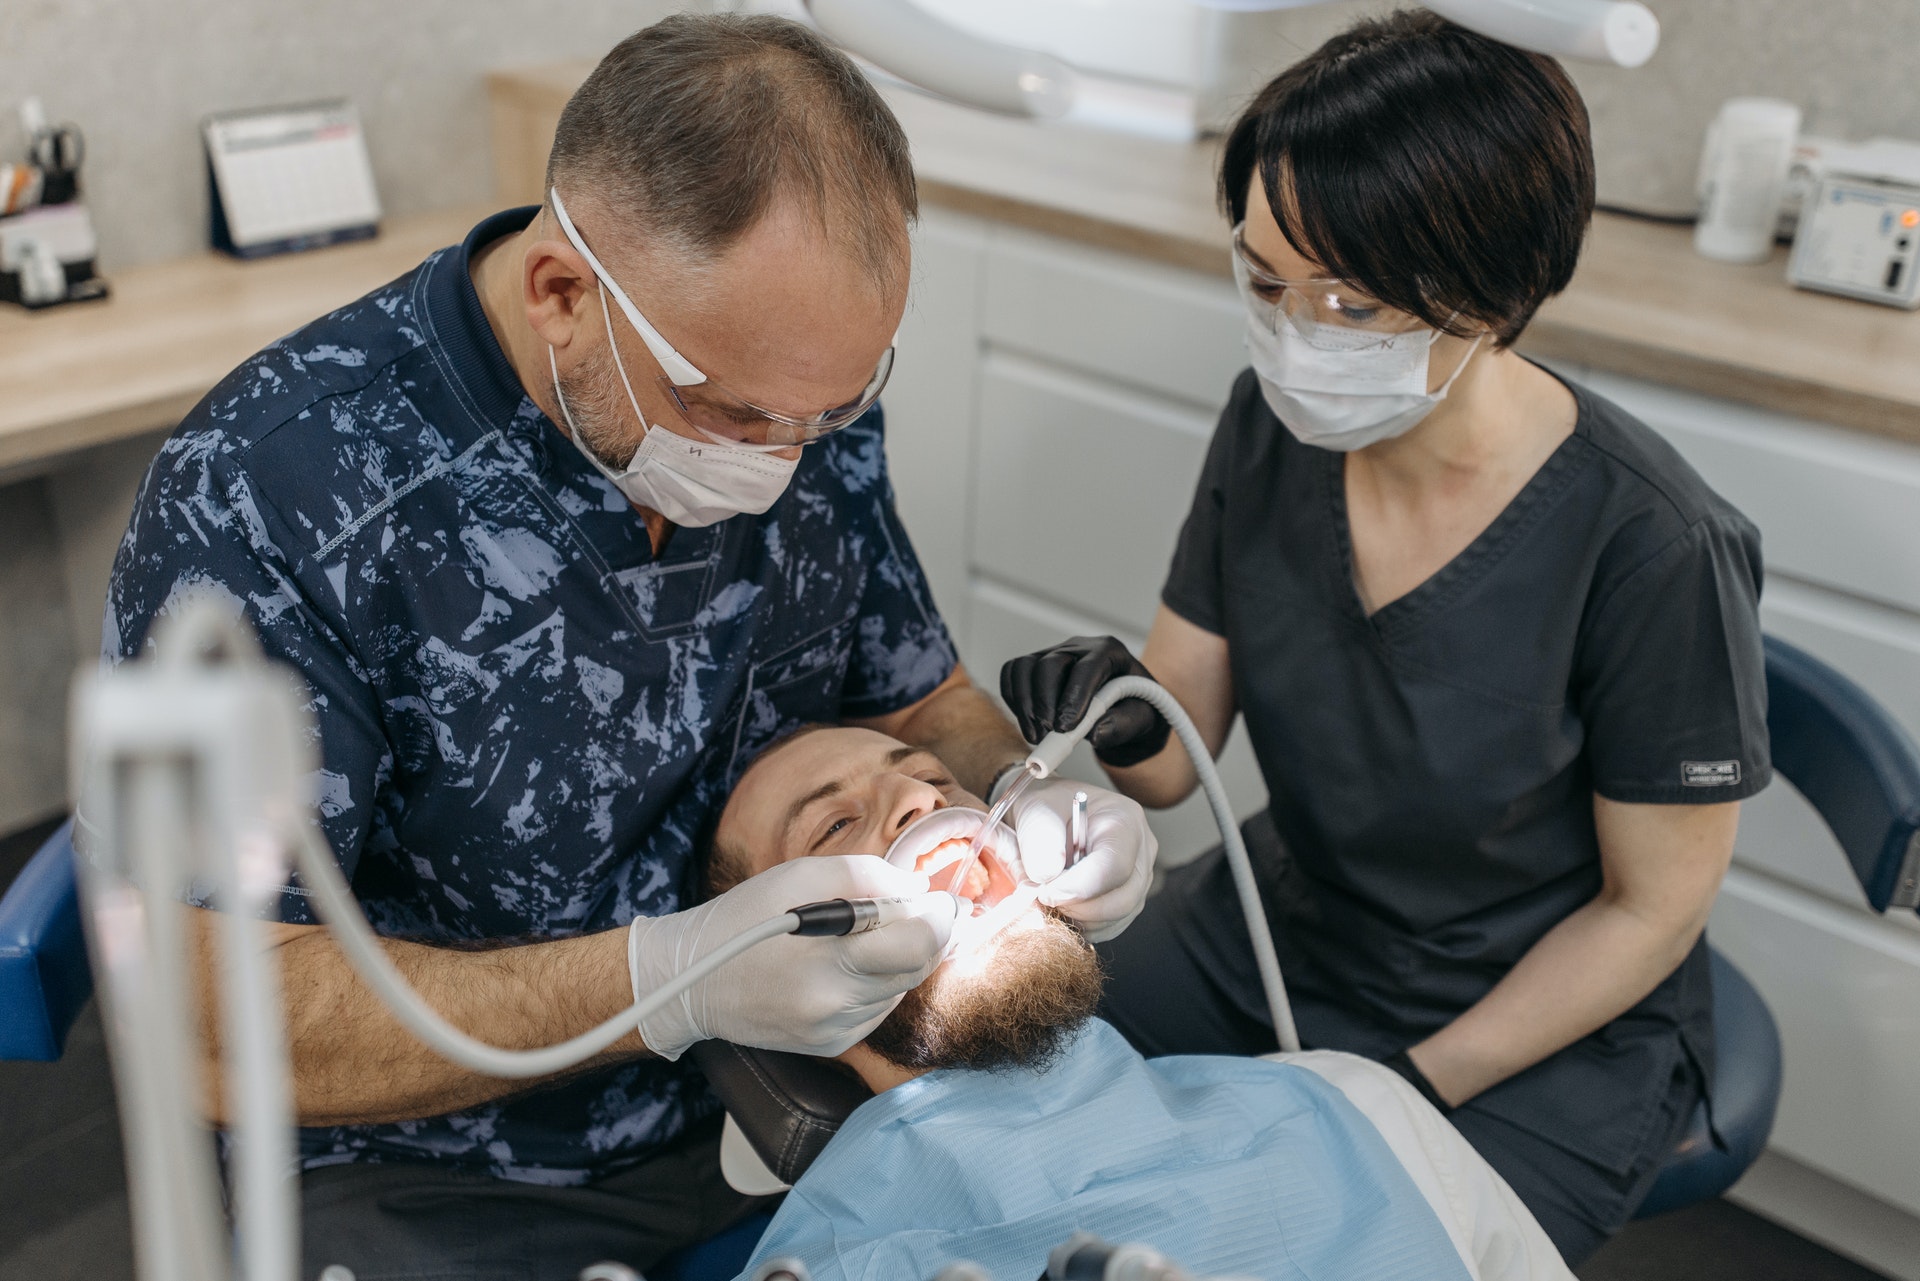 Common Procedures Performed at the Dentist in Idaho Falls